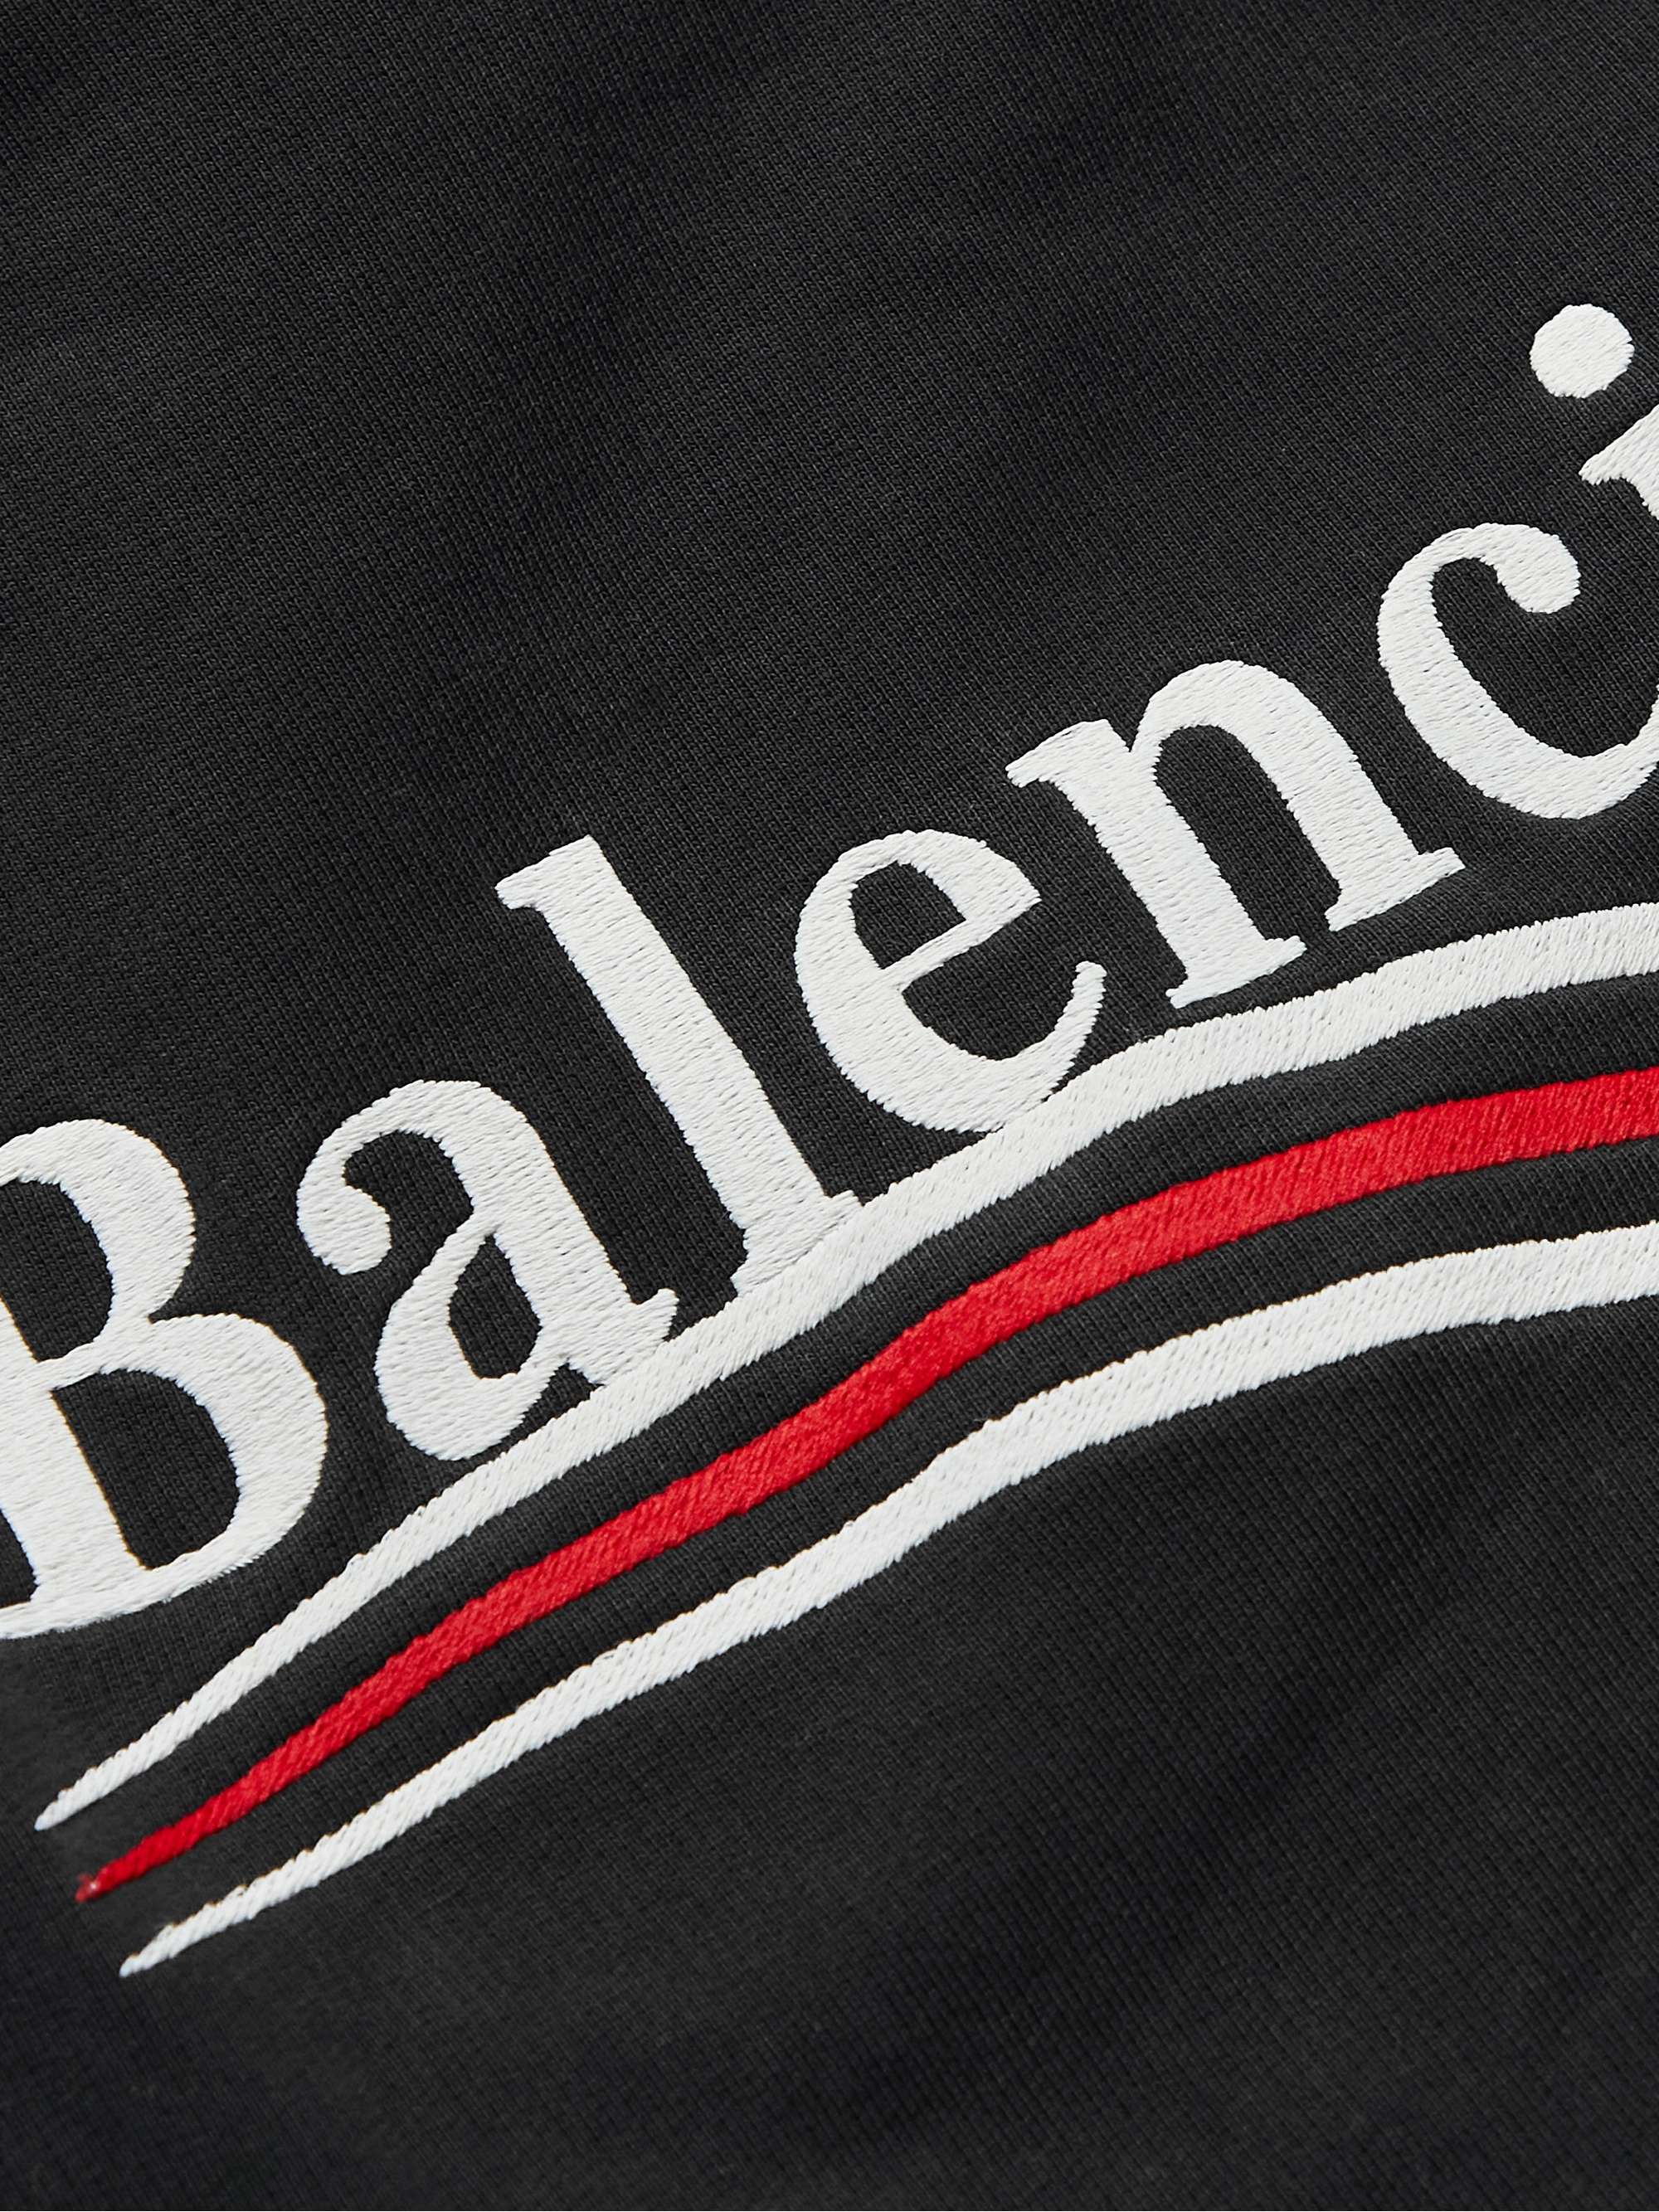 BALENCIAGA Oversized Distressed Logo-Embroidered Cotton-Jersey Hoodie